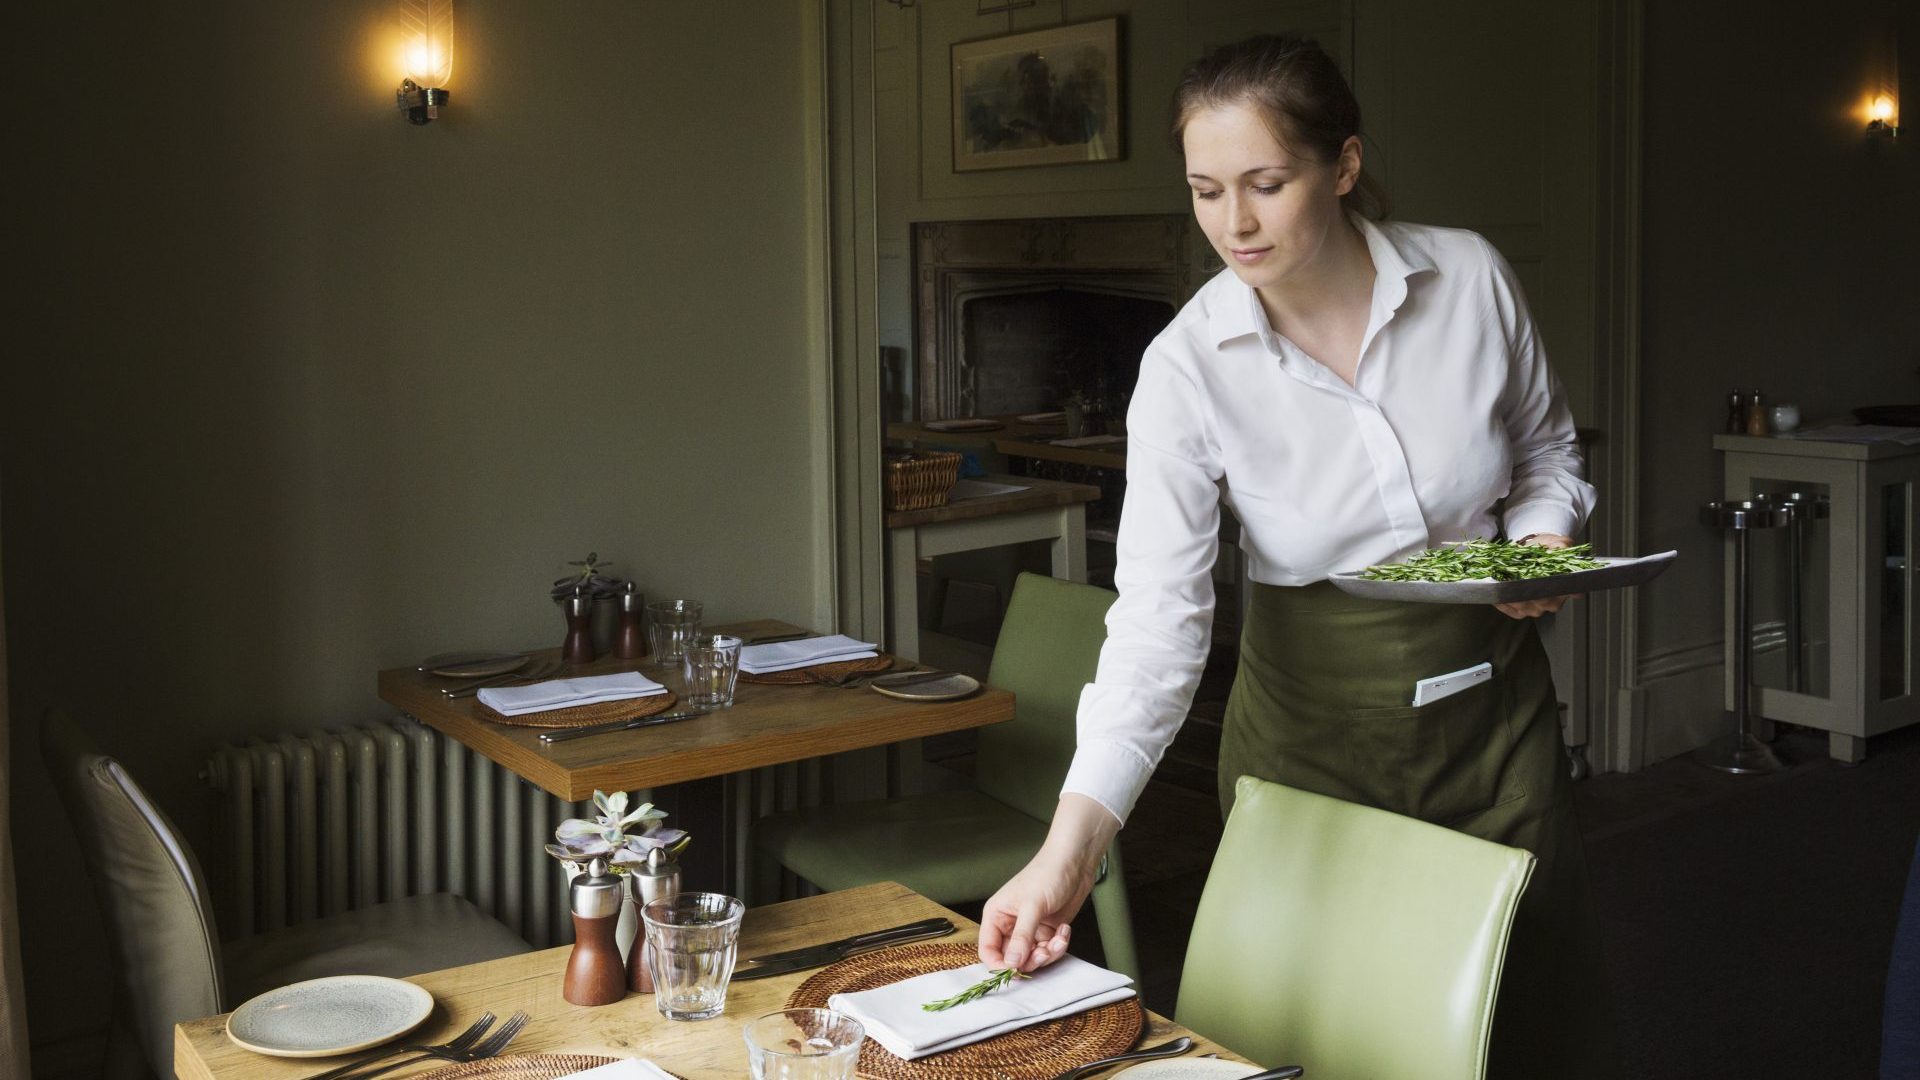 The hospitality industry is struggling to fill large numbers of vacancies. Photo: Getty